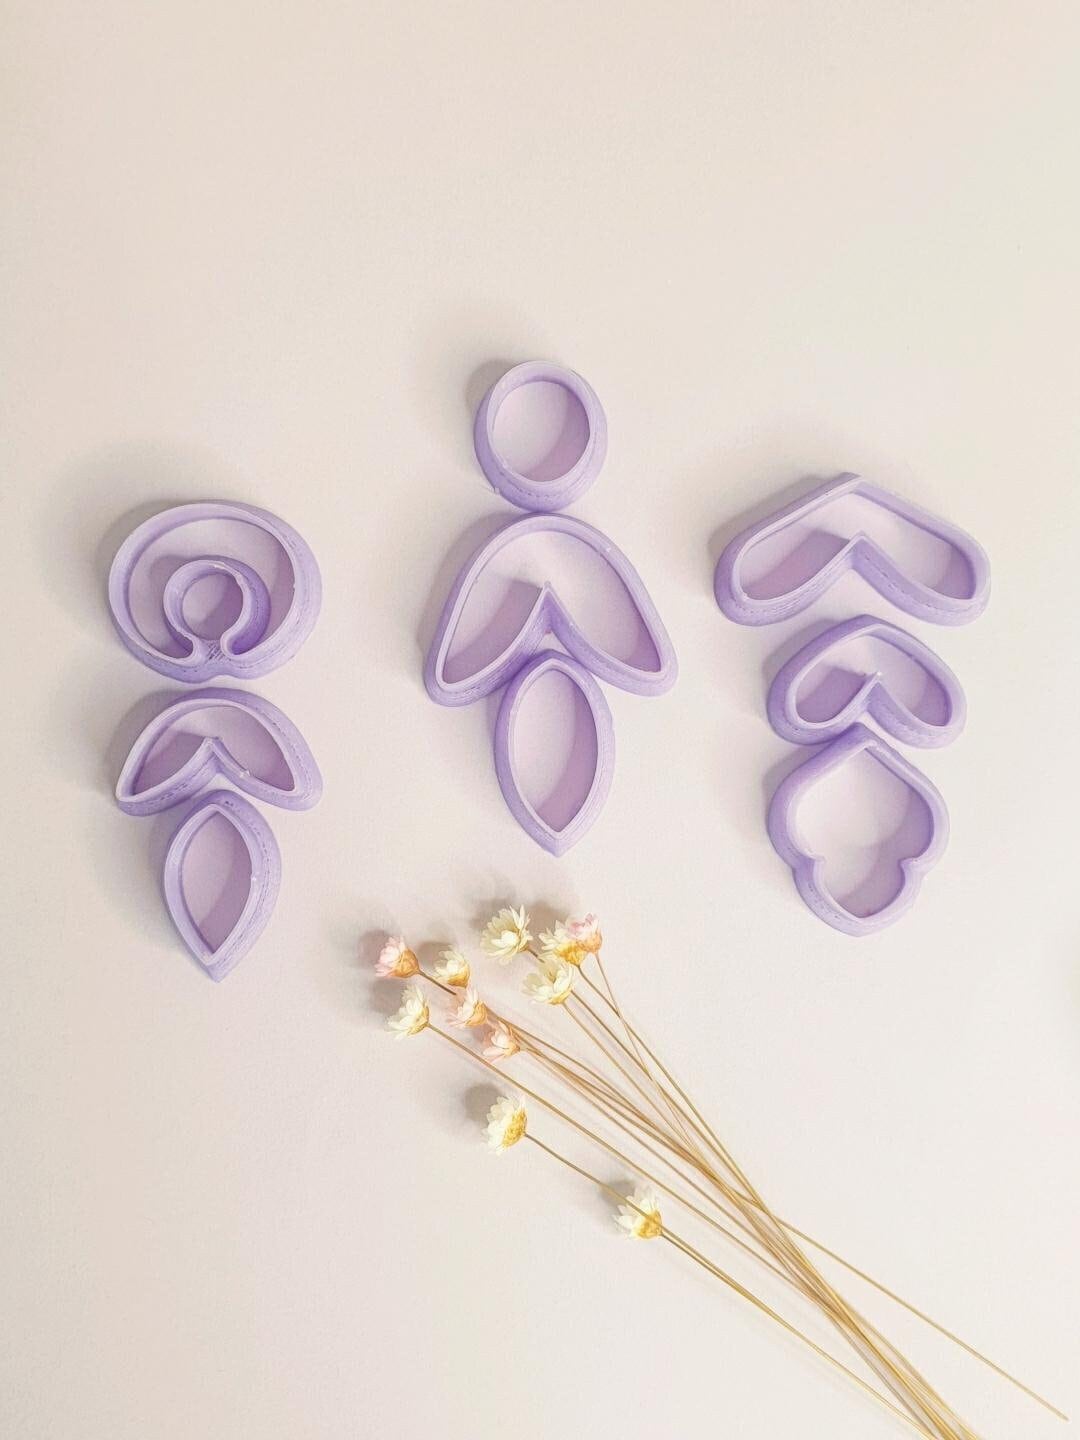 Keoker Flower Petal Clay Cutters - Flower Petals Clay Cutters for Earrings  Making, 6 Shapes with Petal Press Polymer Clay Moulds, Clay Cutters for  Polymer Clay Jewellery by Keoker - Shop Online